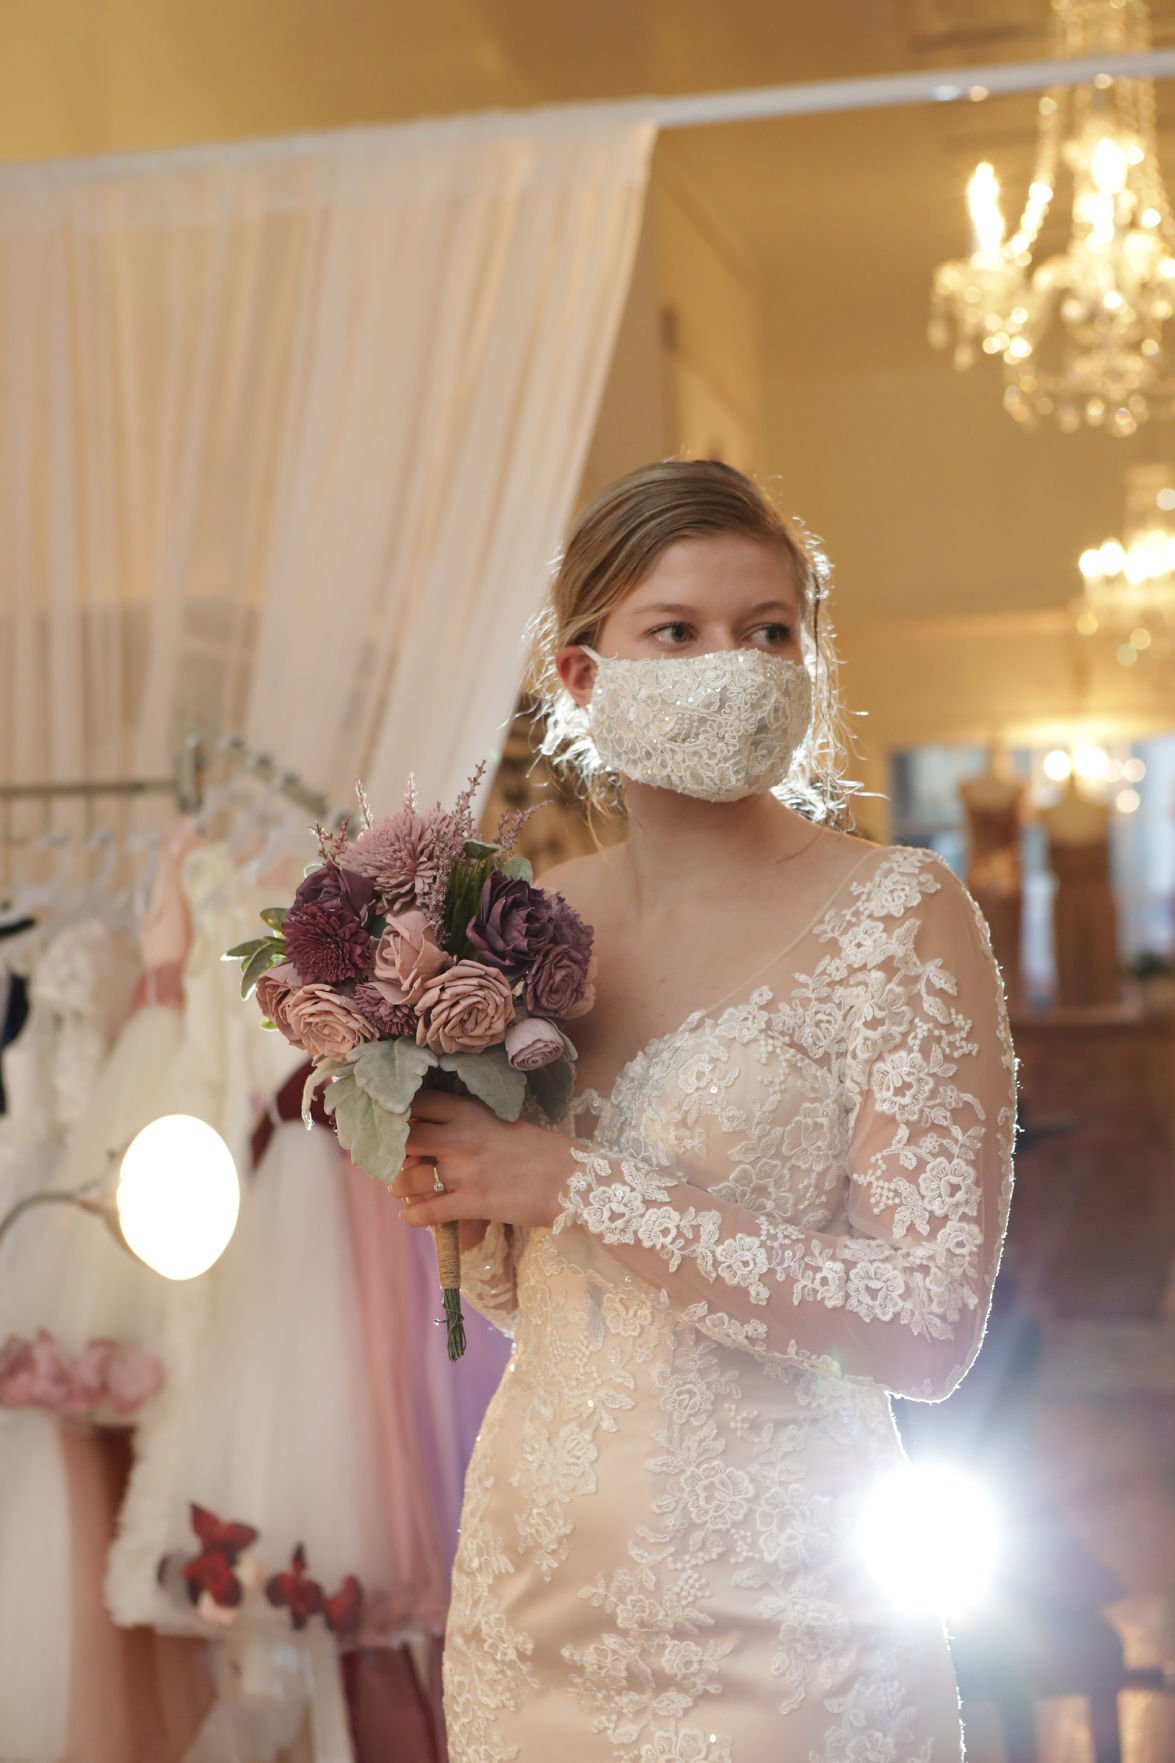 One thing the pandemic hasn't changed is brides' desire for that special dress